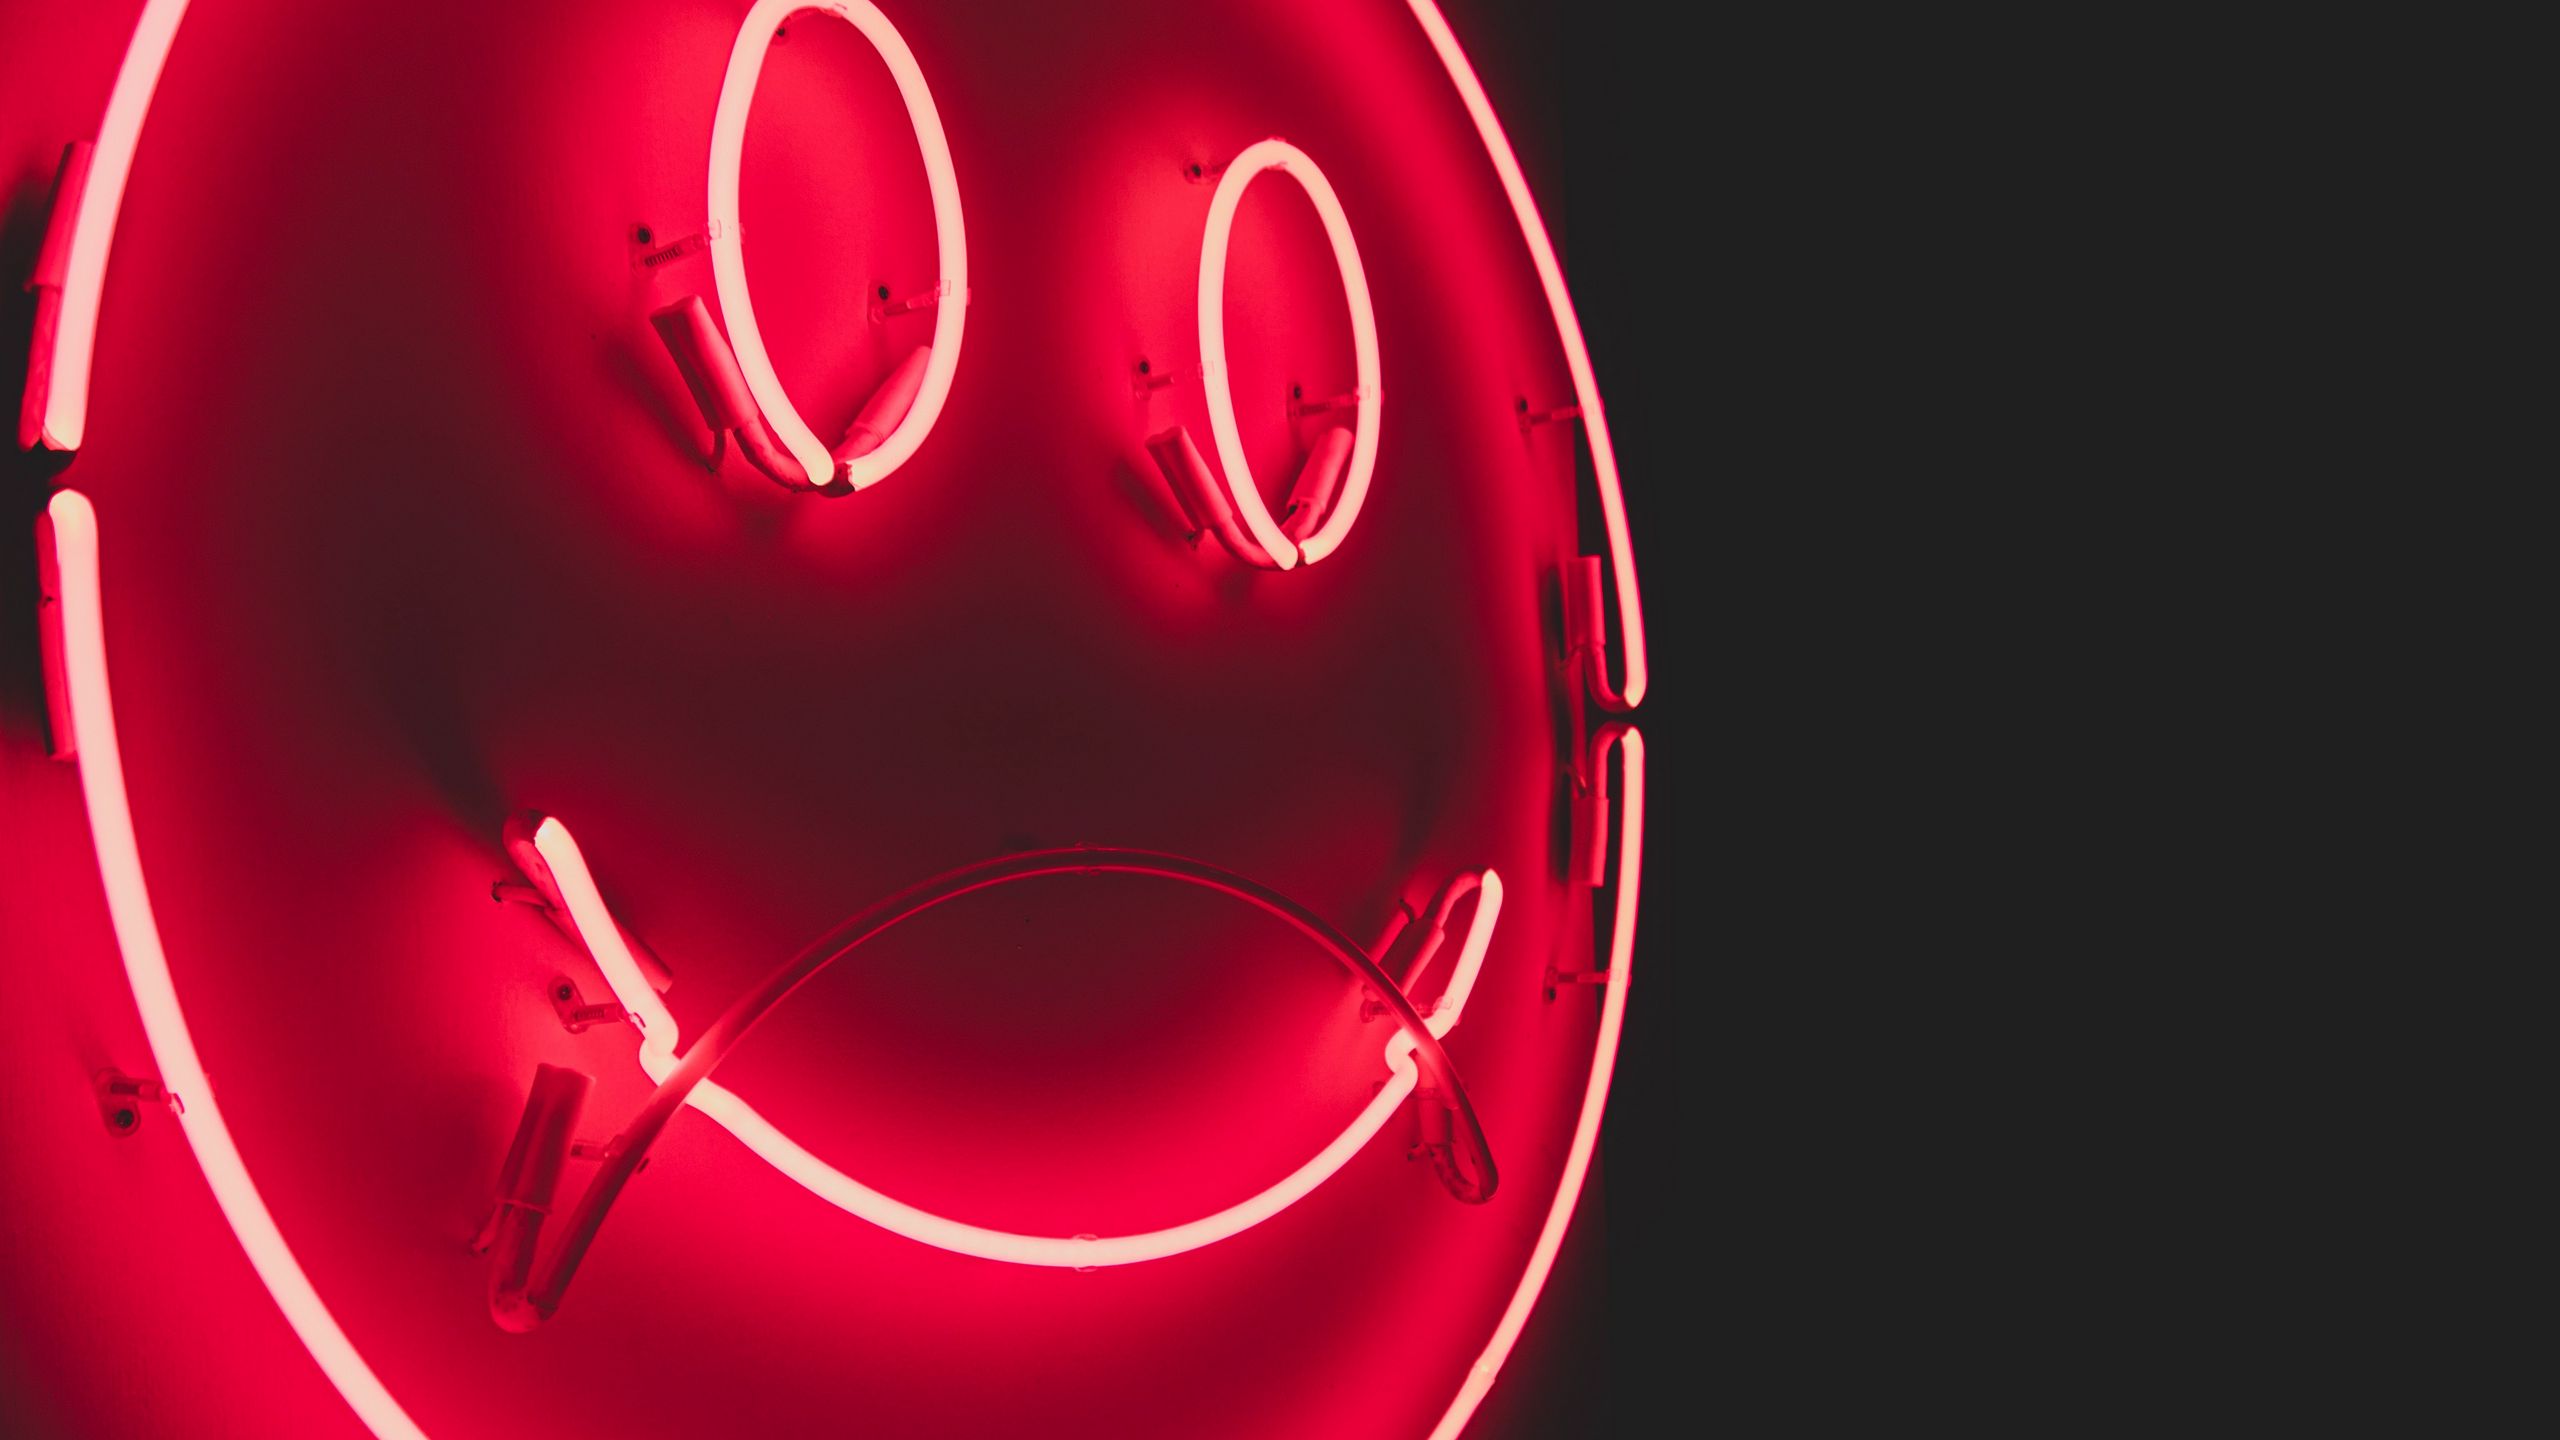 2560x1440 Wallpaper smile, smiley, neon, glow, red